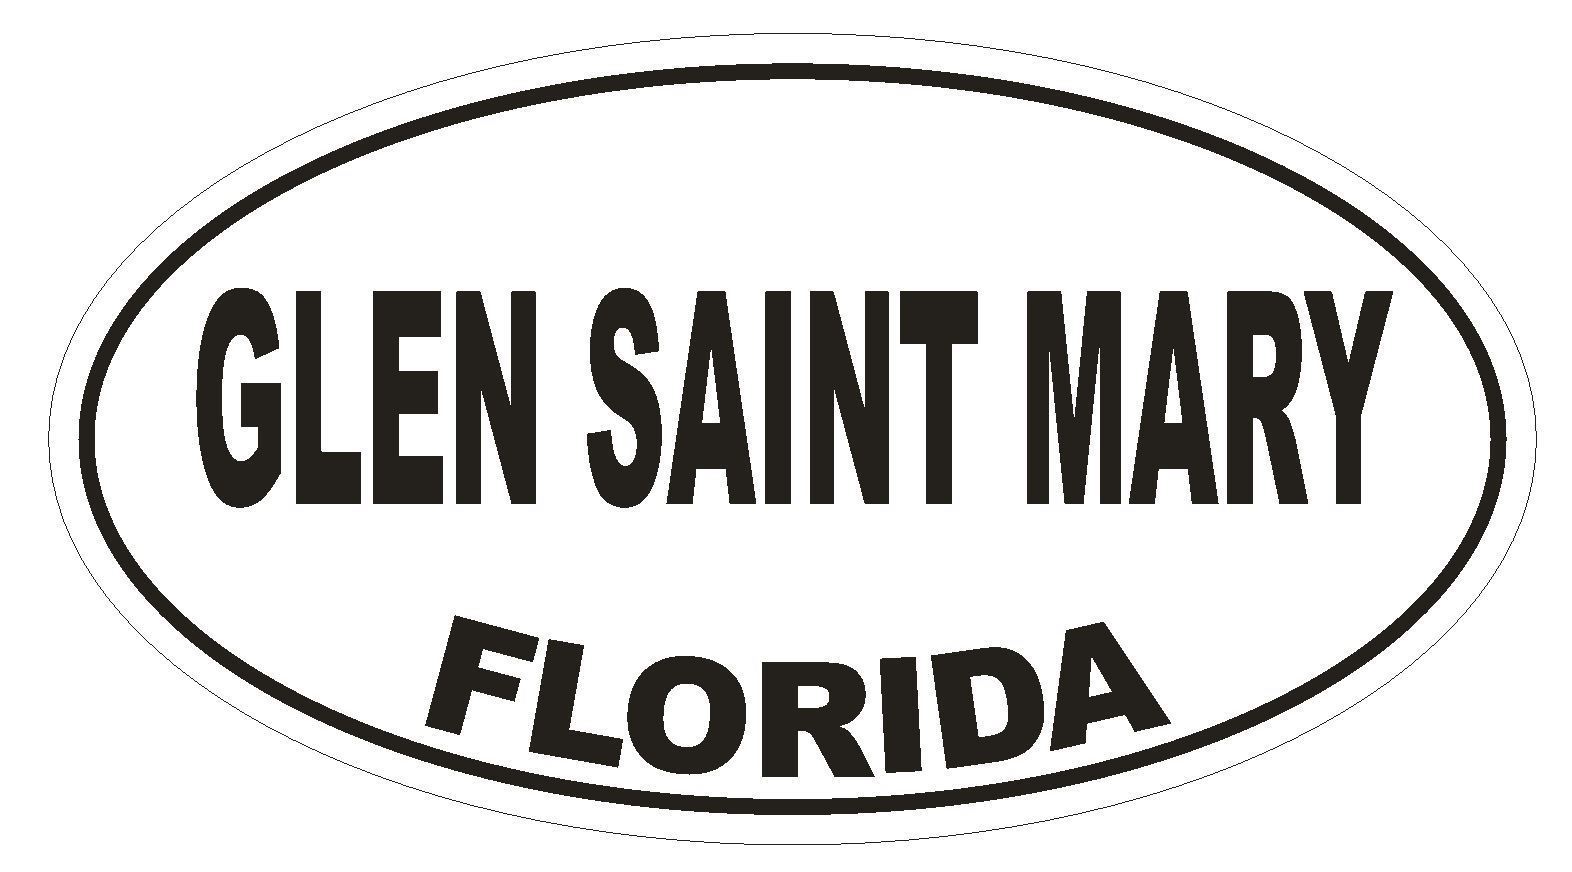 Primary image for Glen Saint Mary Florida Oval Bumper Sticker or Helmet Sticker D2656 Euro Decal